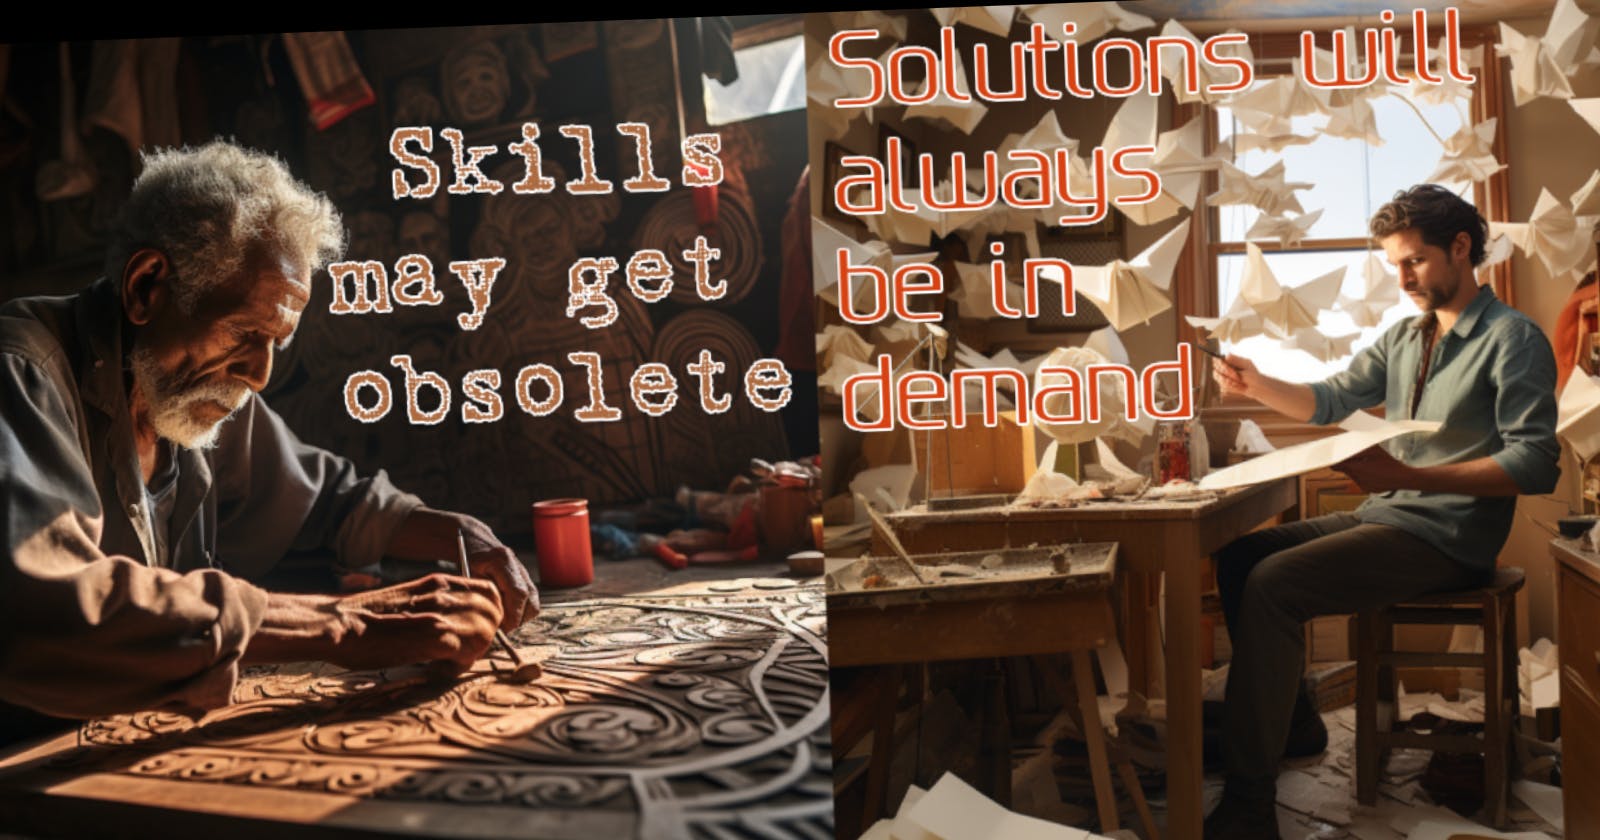 Skills may get obsolete, Solutions will always be in demand